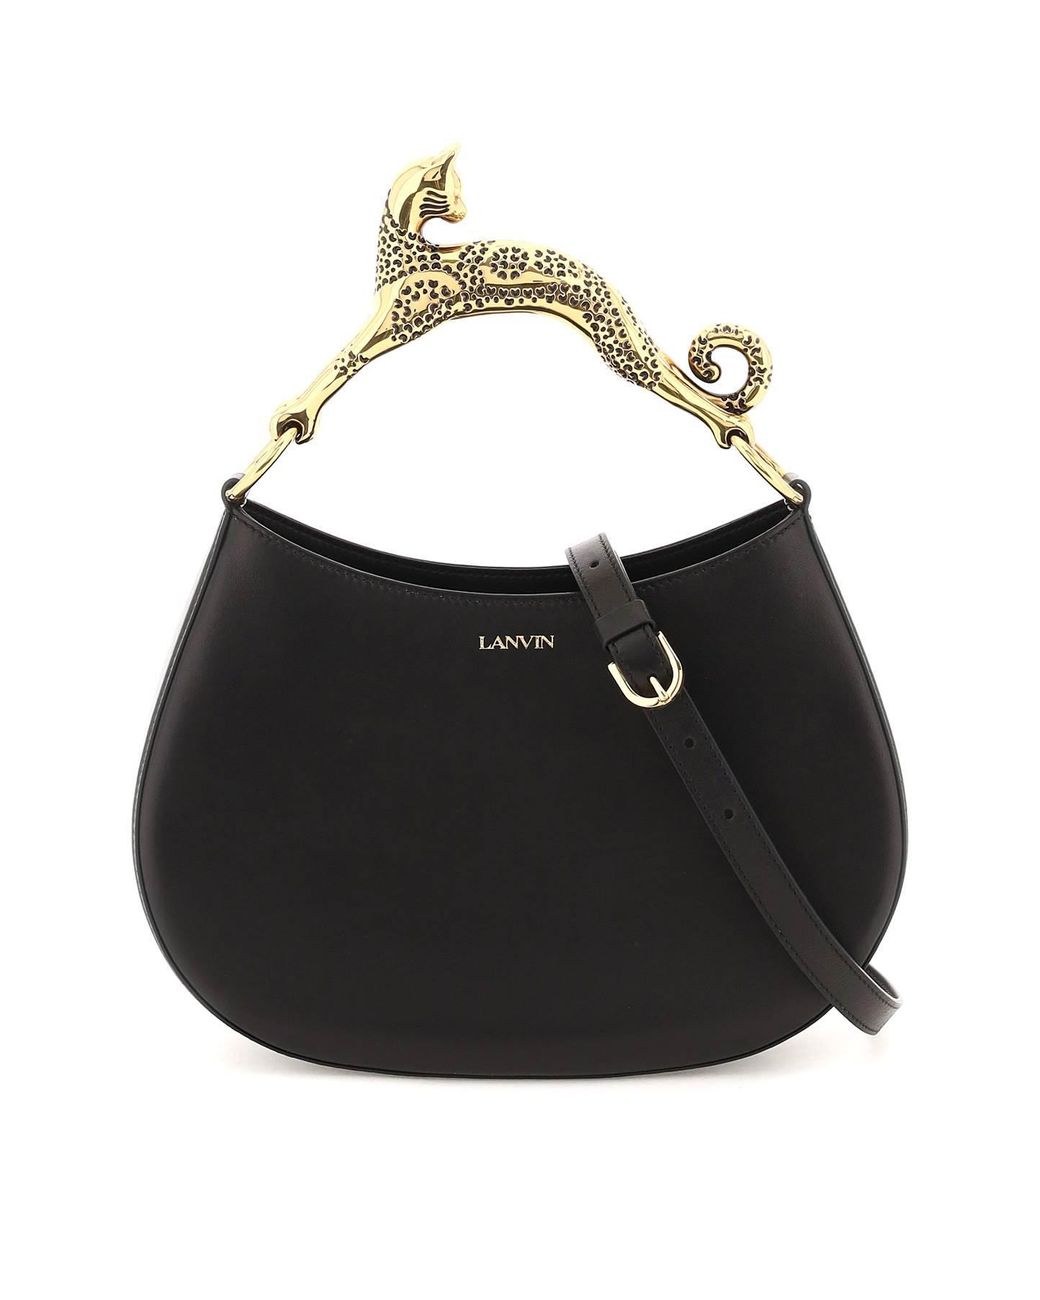 Lanvin Leather Small Hobo Cat Bag in Black | Lyst